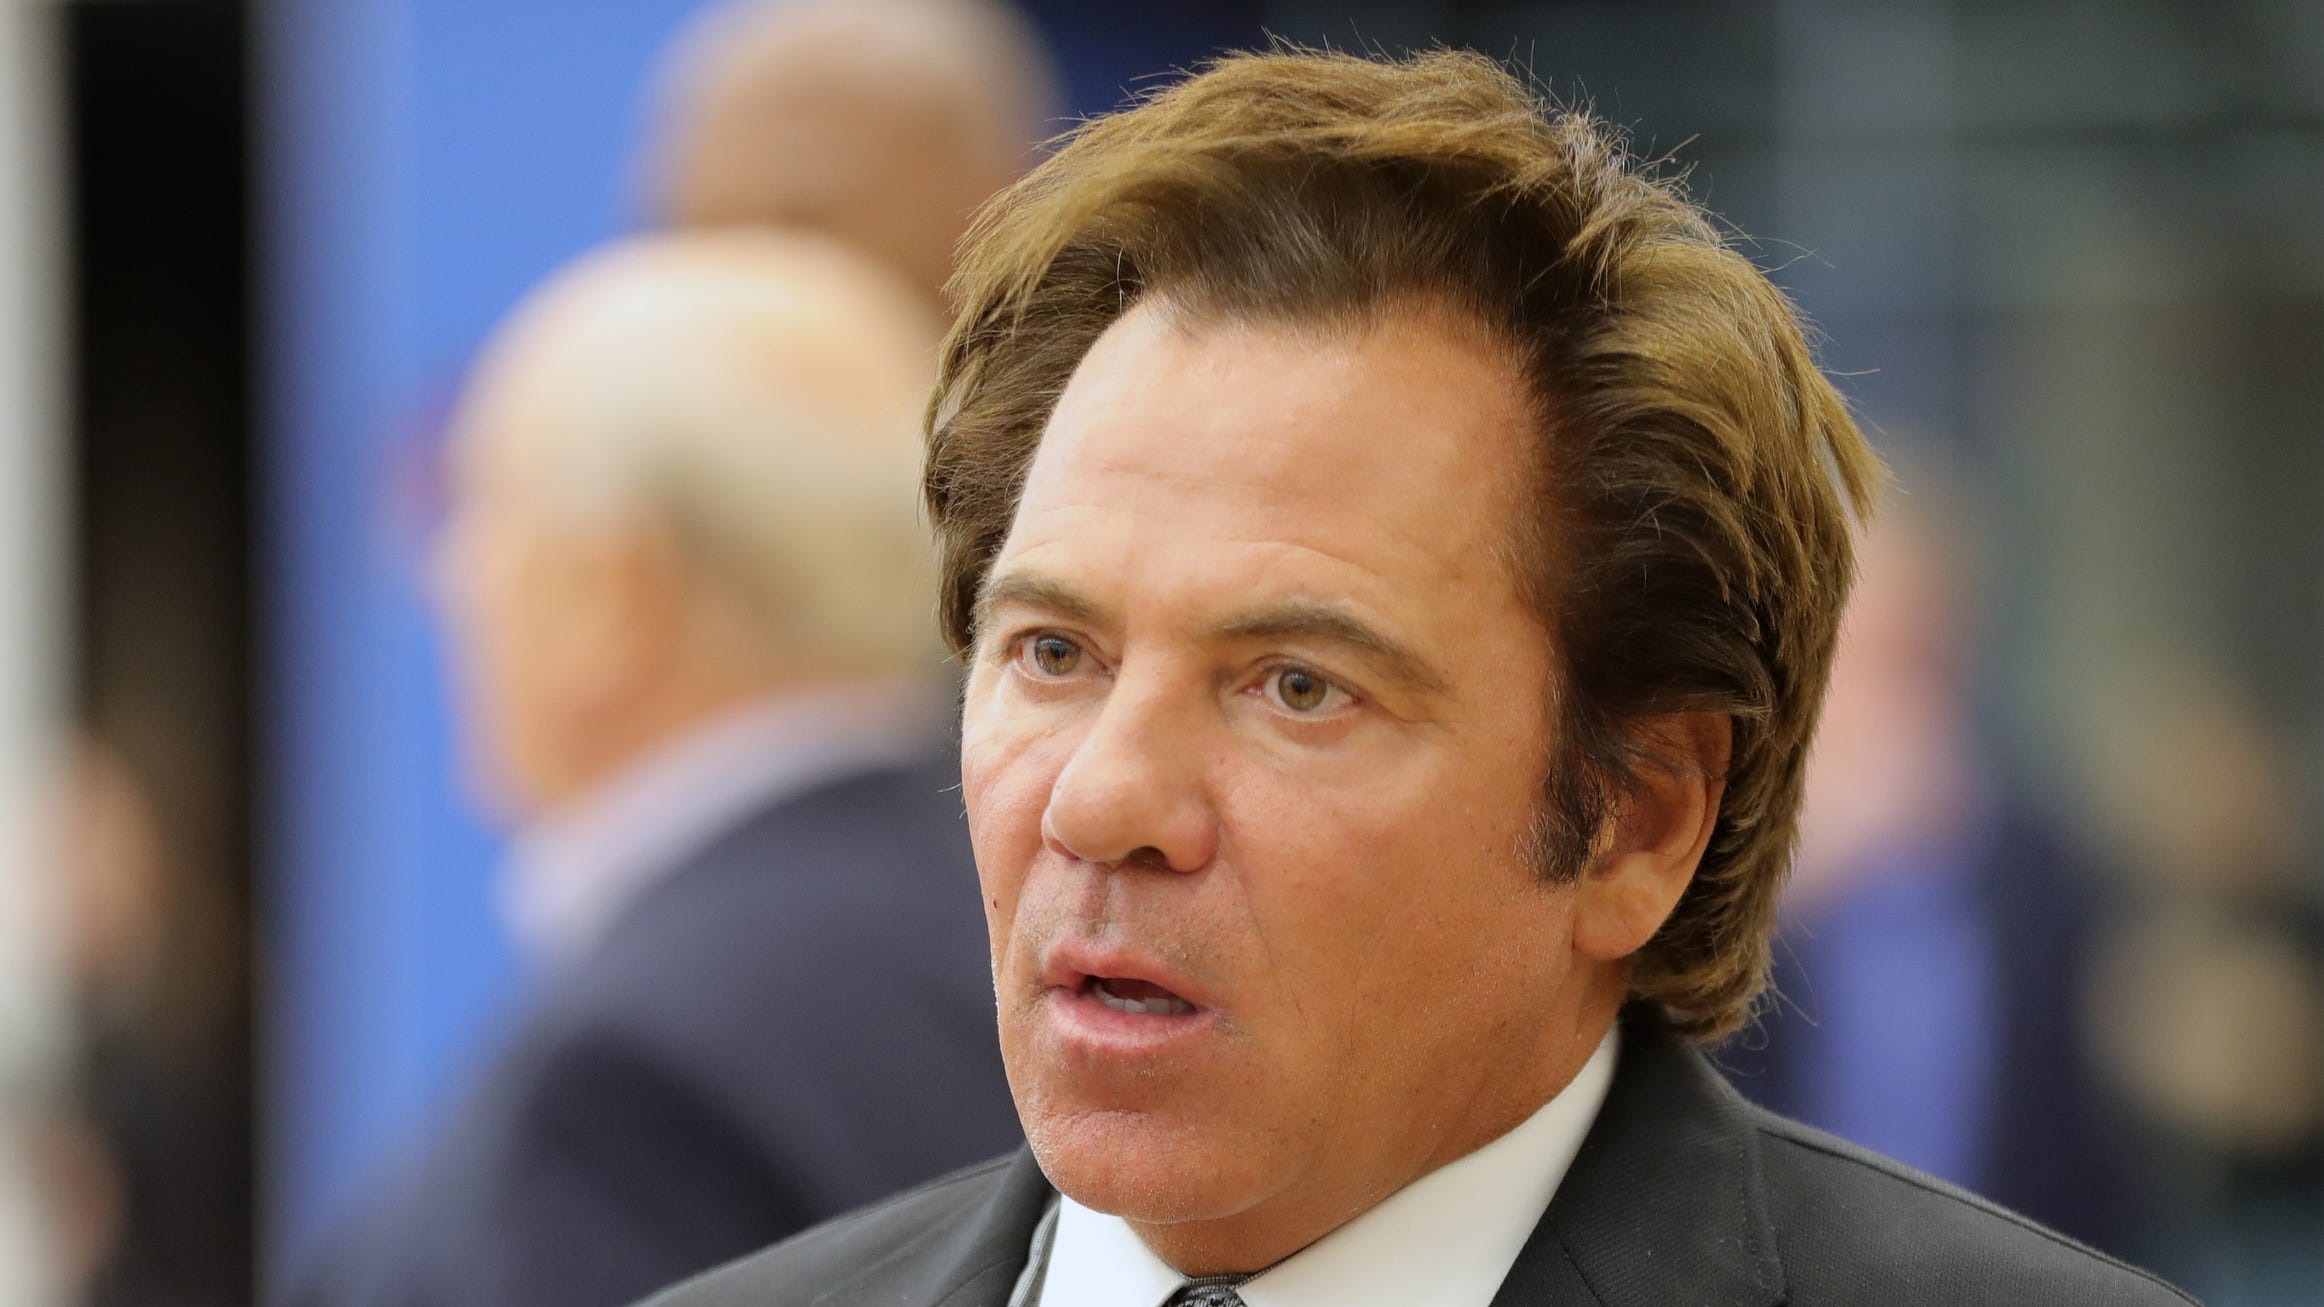 Detroit Pistons owner Tom Gores defends dealings with Securus